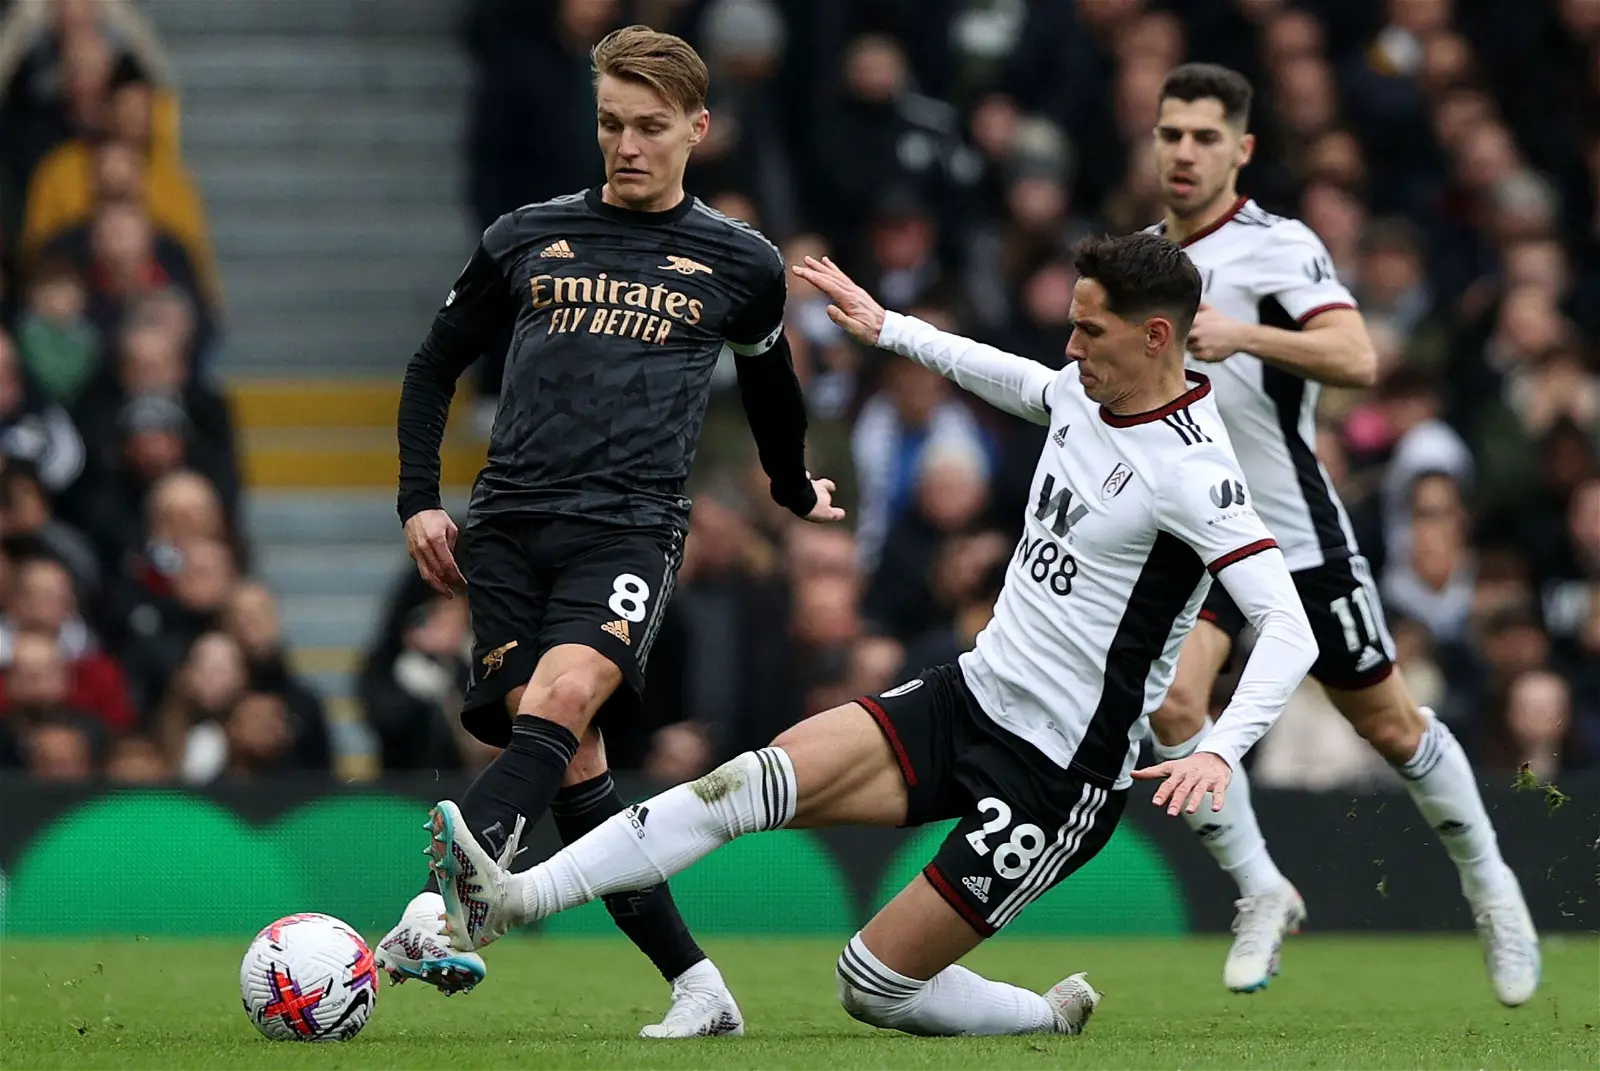 Arsenal vs Fulham: Previewing the Match – Team Updates and Head-to-Head Analysis